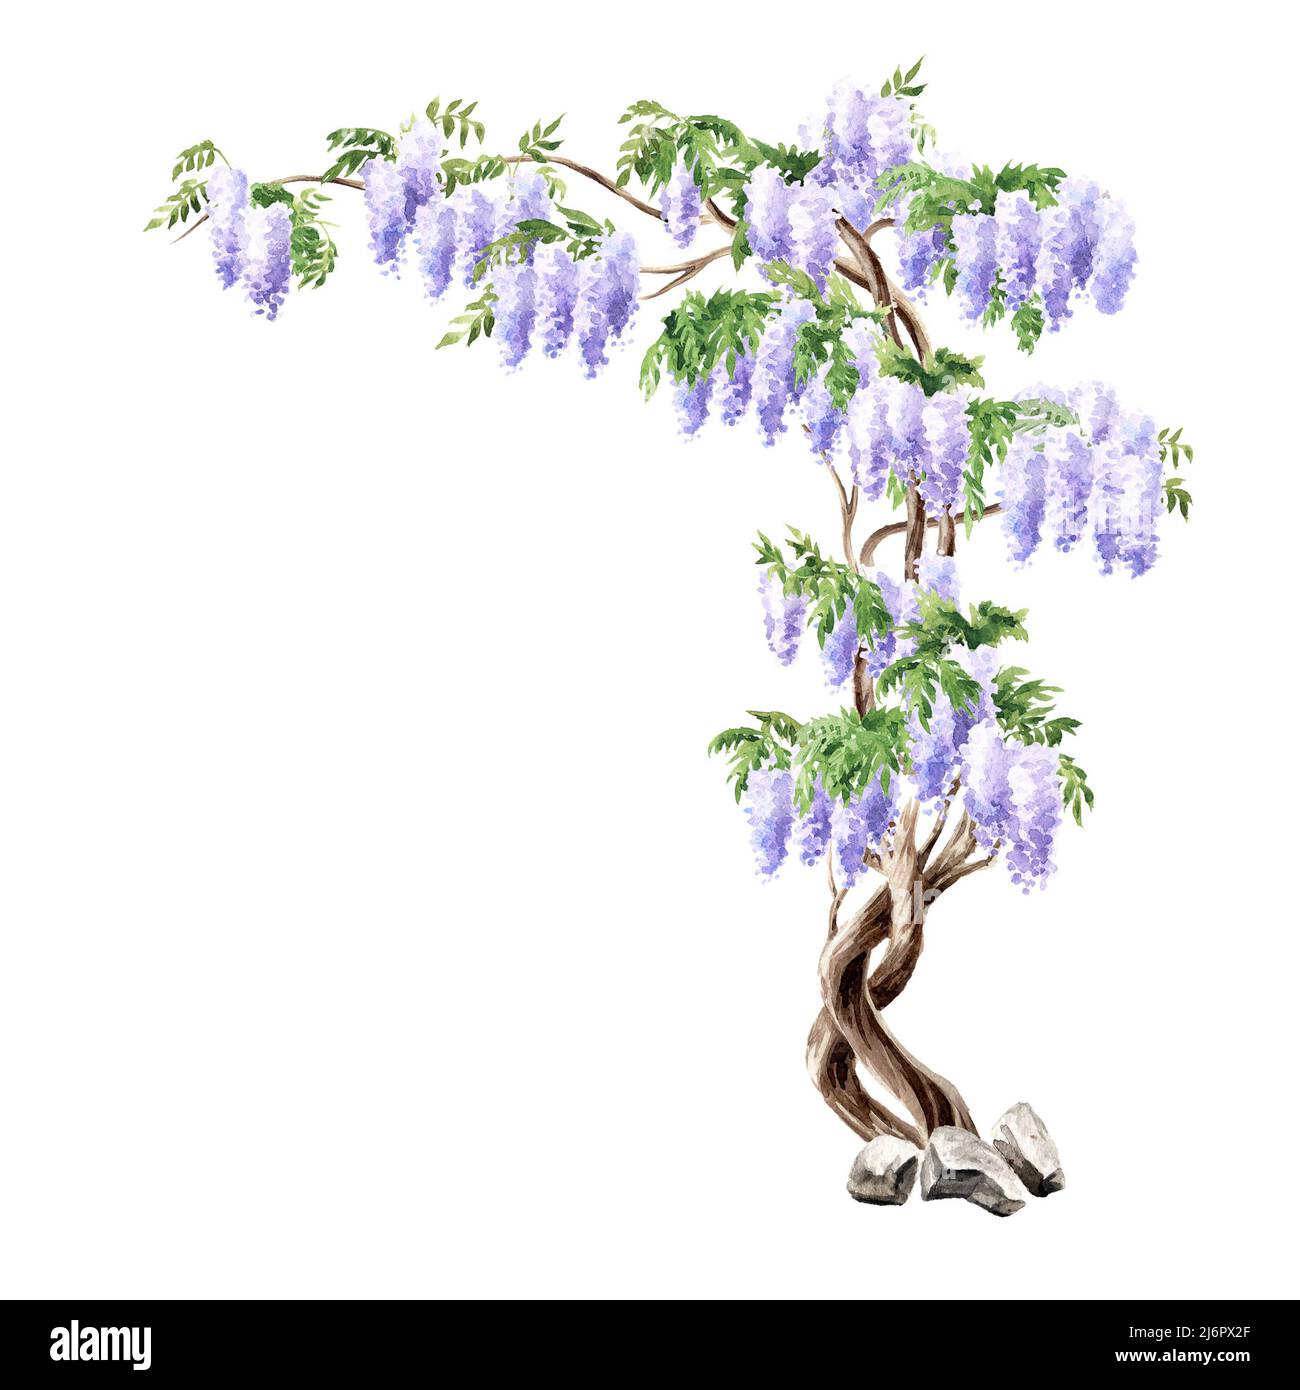 Wisteria blossom tree. Hand  drawn watercolor  illustration isolated on white  background Stock Photo